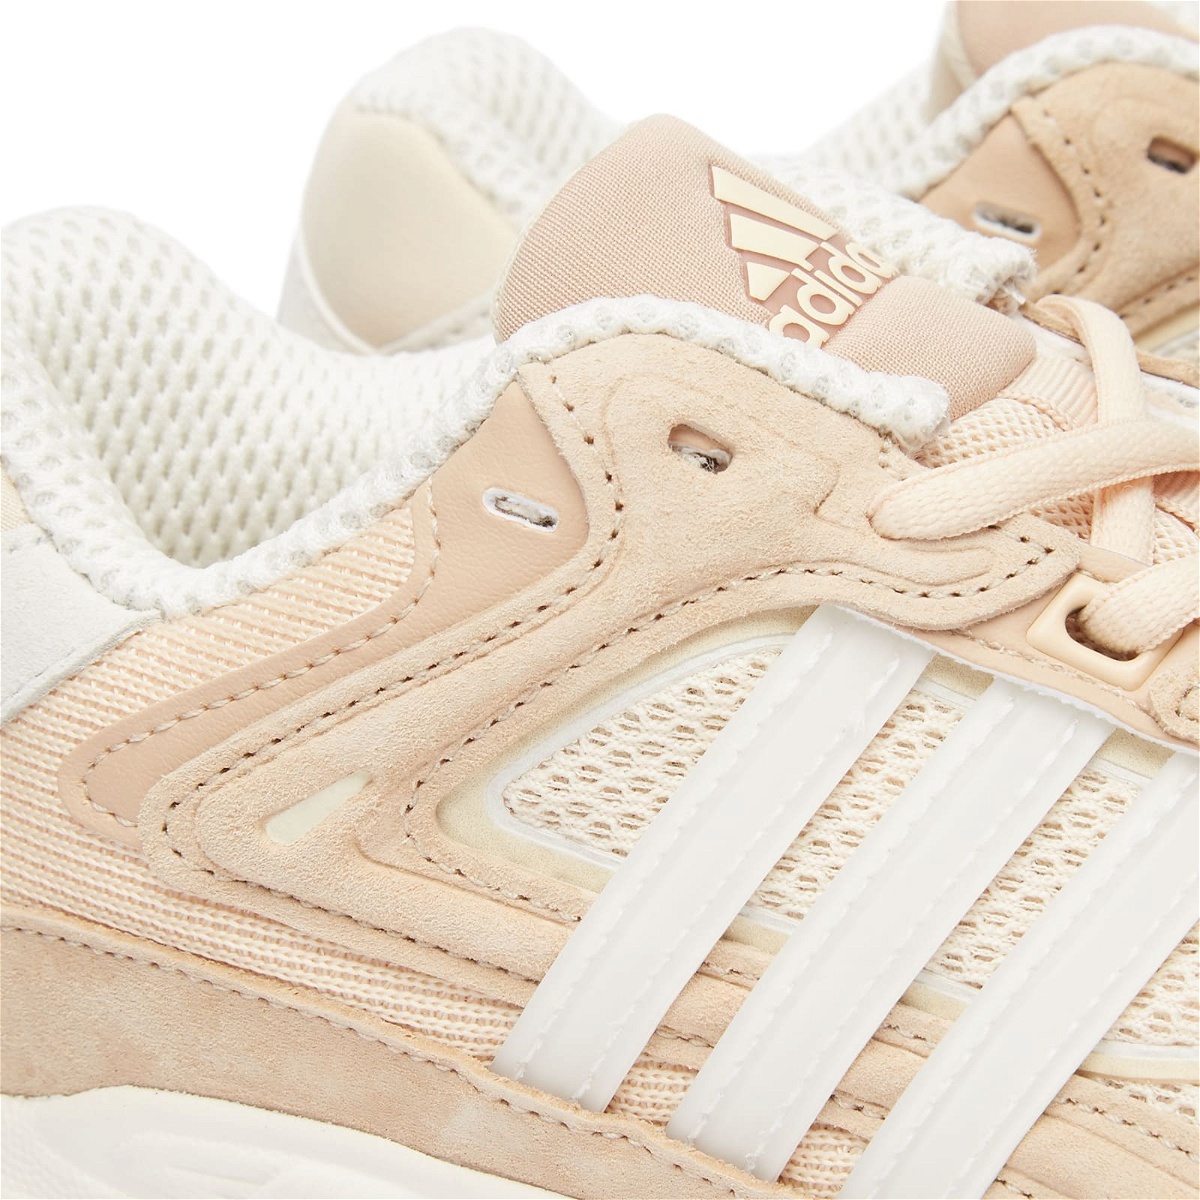 Adidas Response CL Sneakers Sand/Off in adidas White/Beige